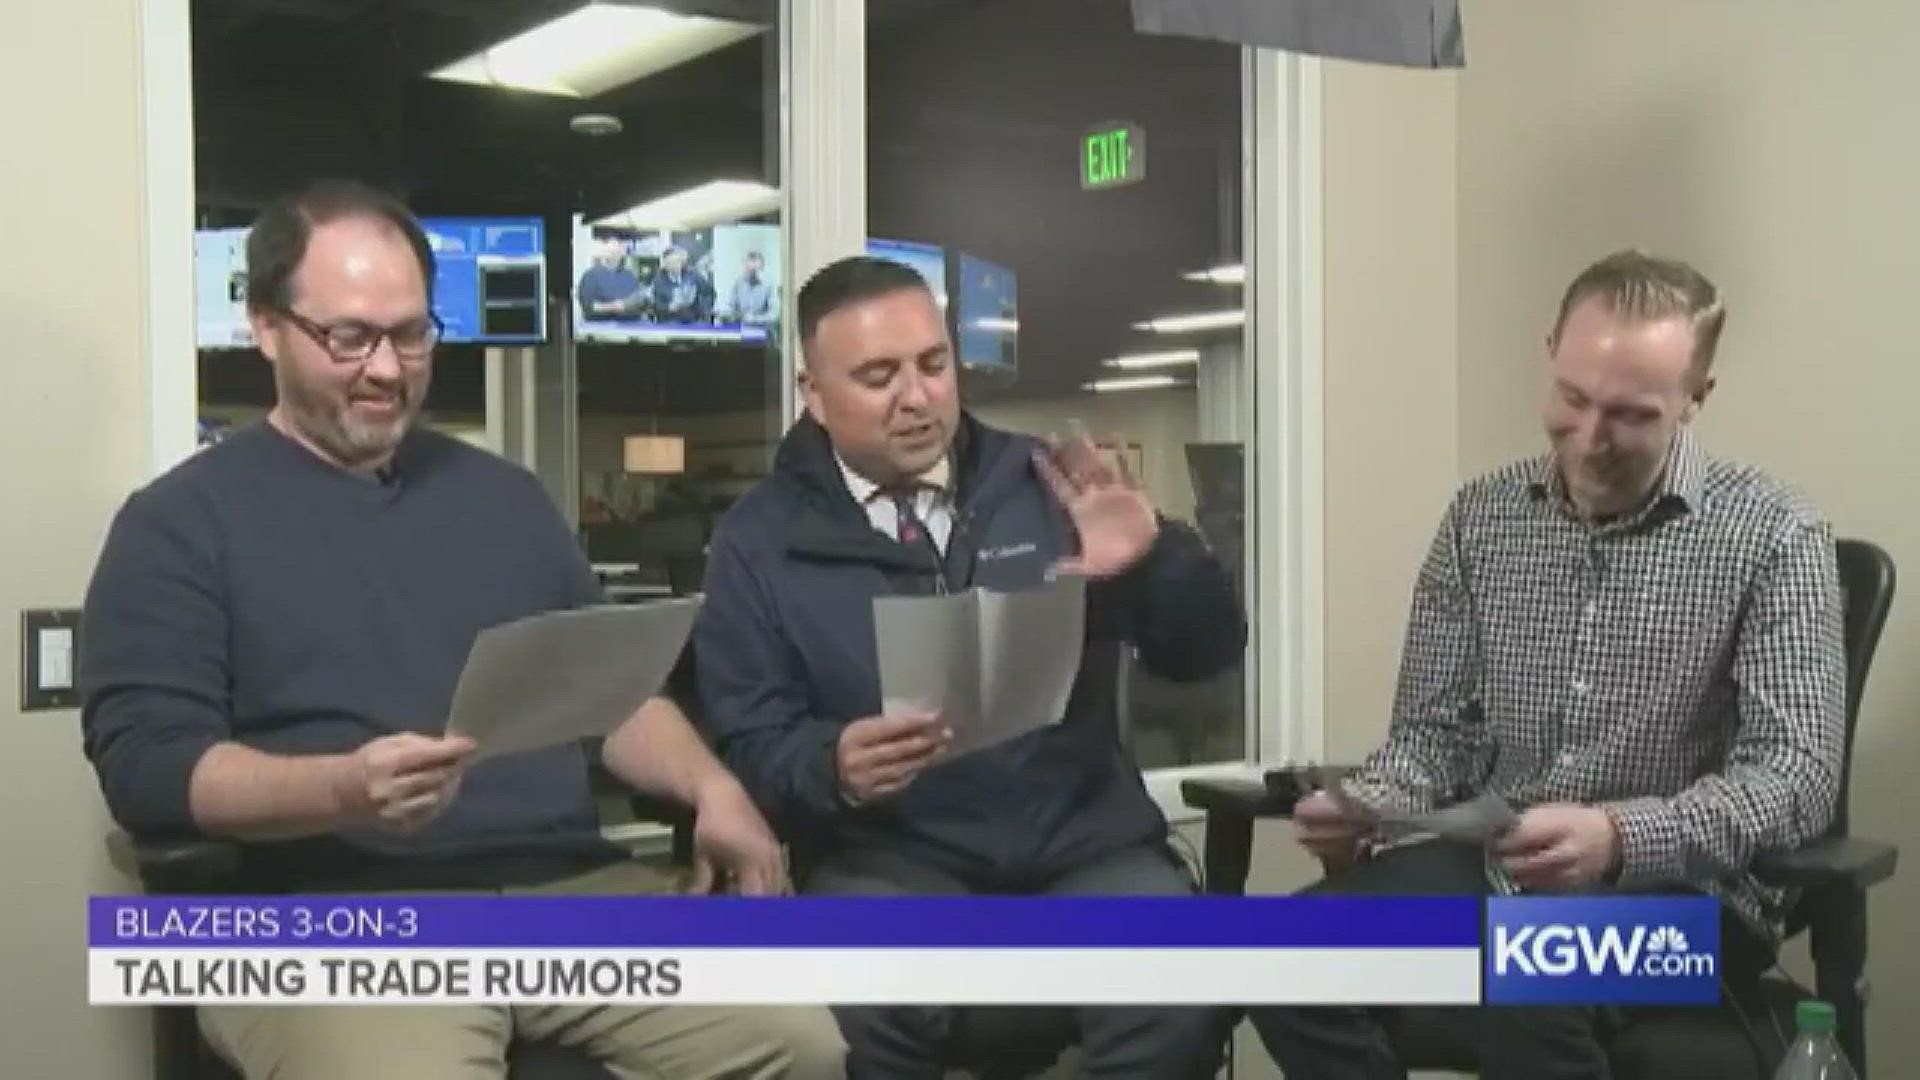 KGW's Jared Cowley, Orlando Sanchez and Nate Hanson talk about the upcoming trade deadline (February 8) and whether the Blazers should be buyers or sellers this season.